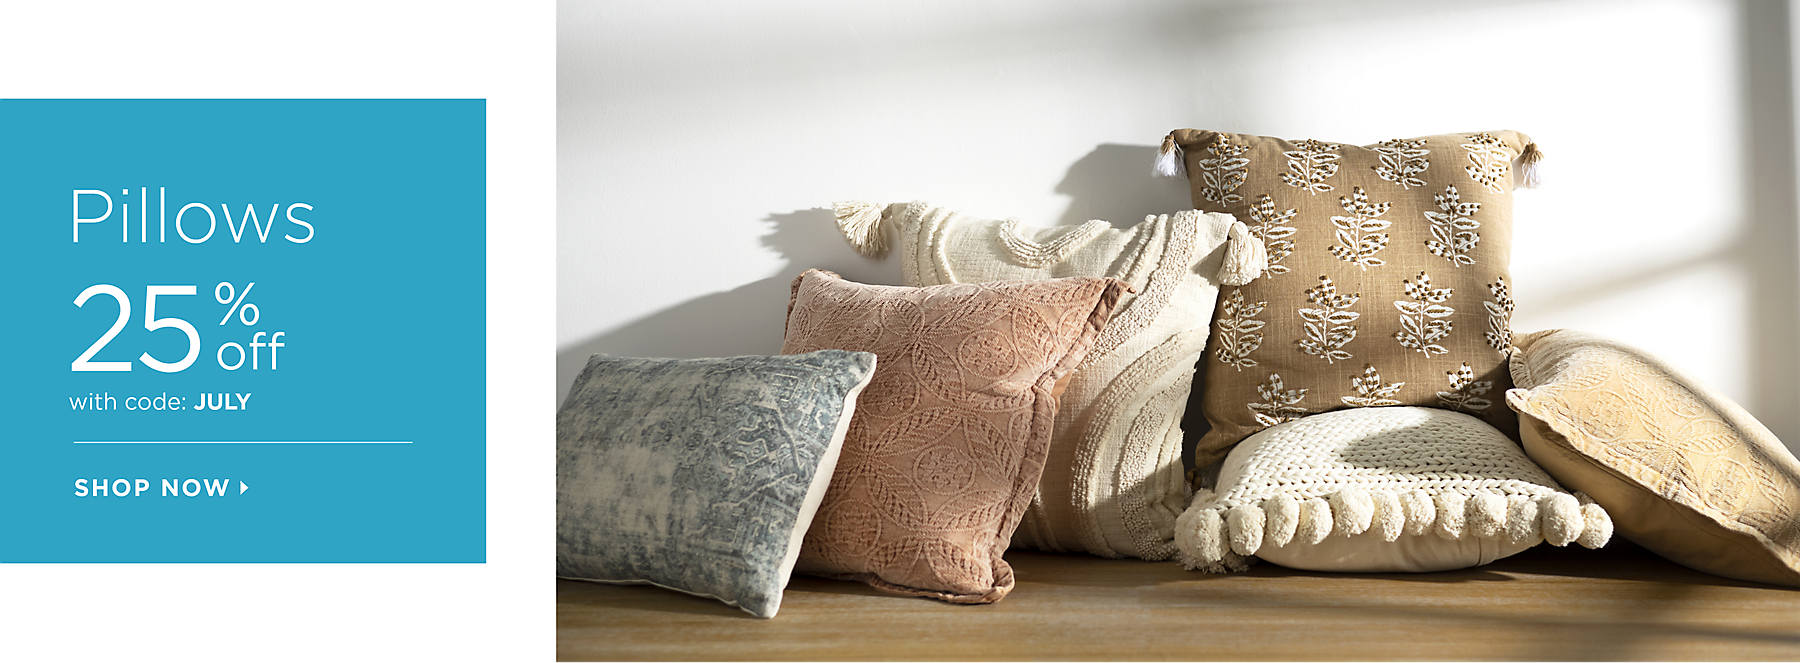 Pillows 25% Off with code: JULY Shop Now